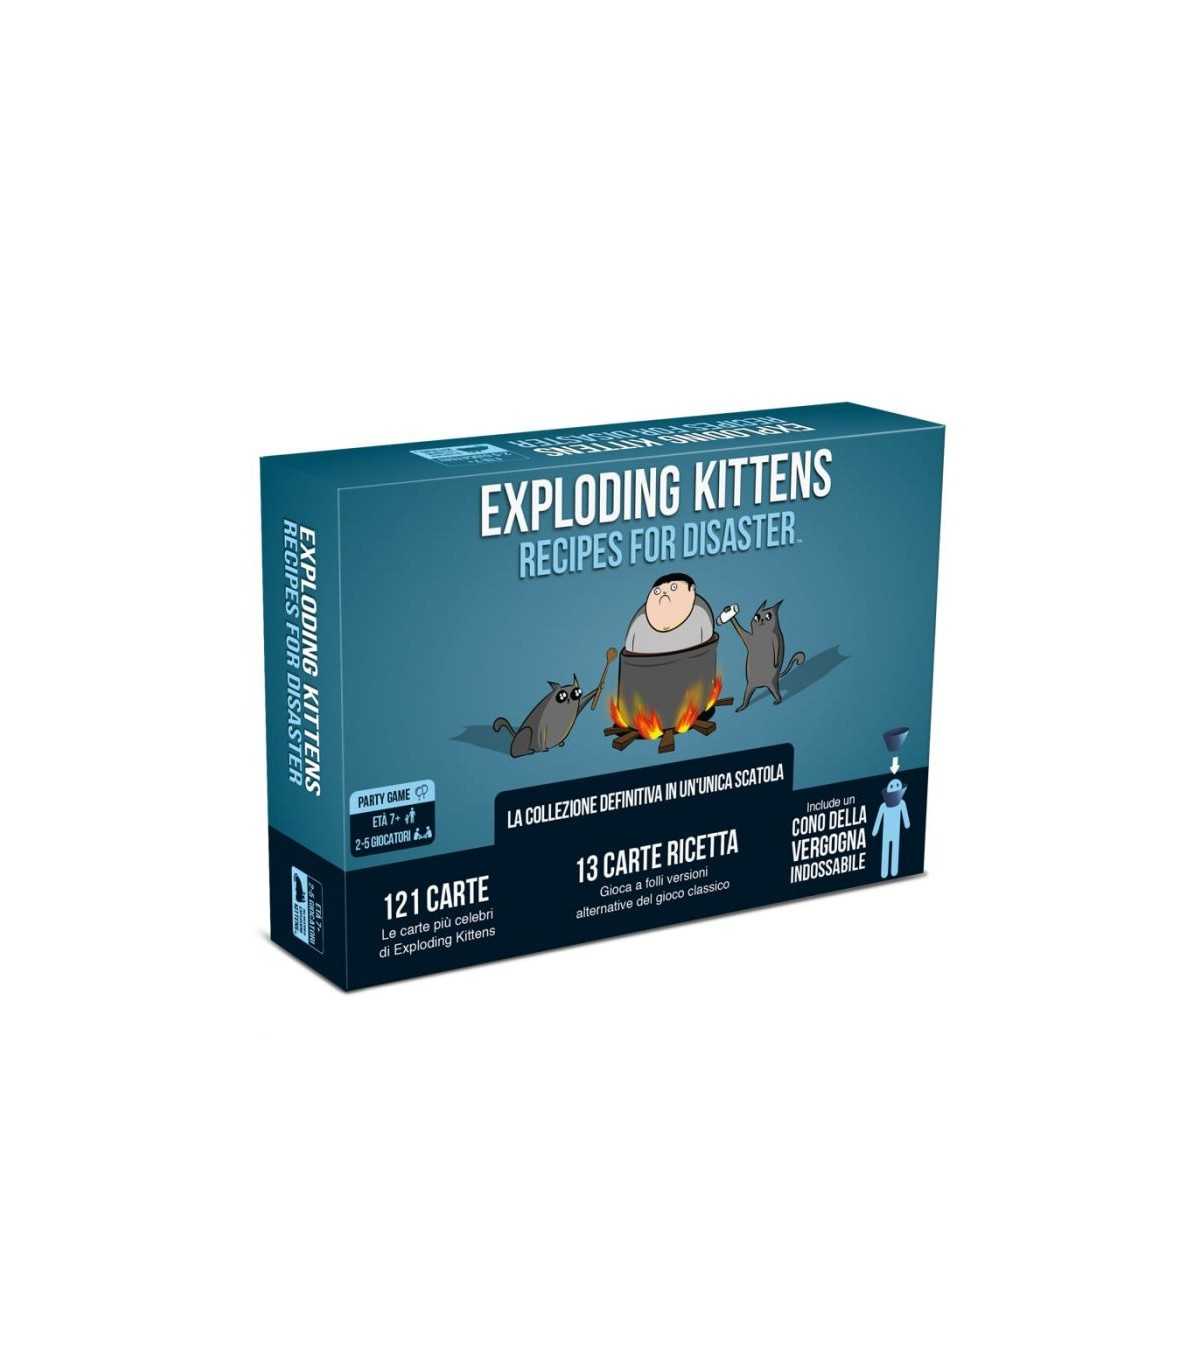 Exploding Kittens - Recipes for Disaster, Party Game